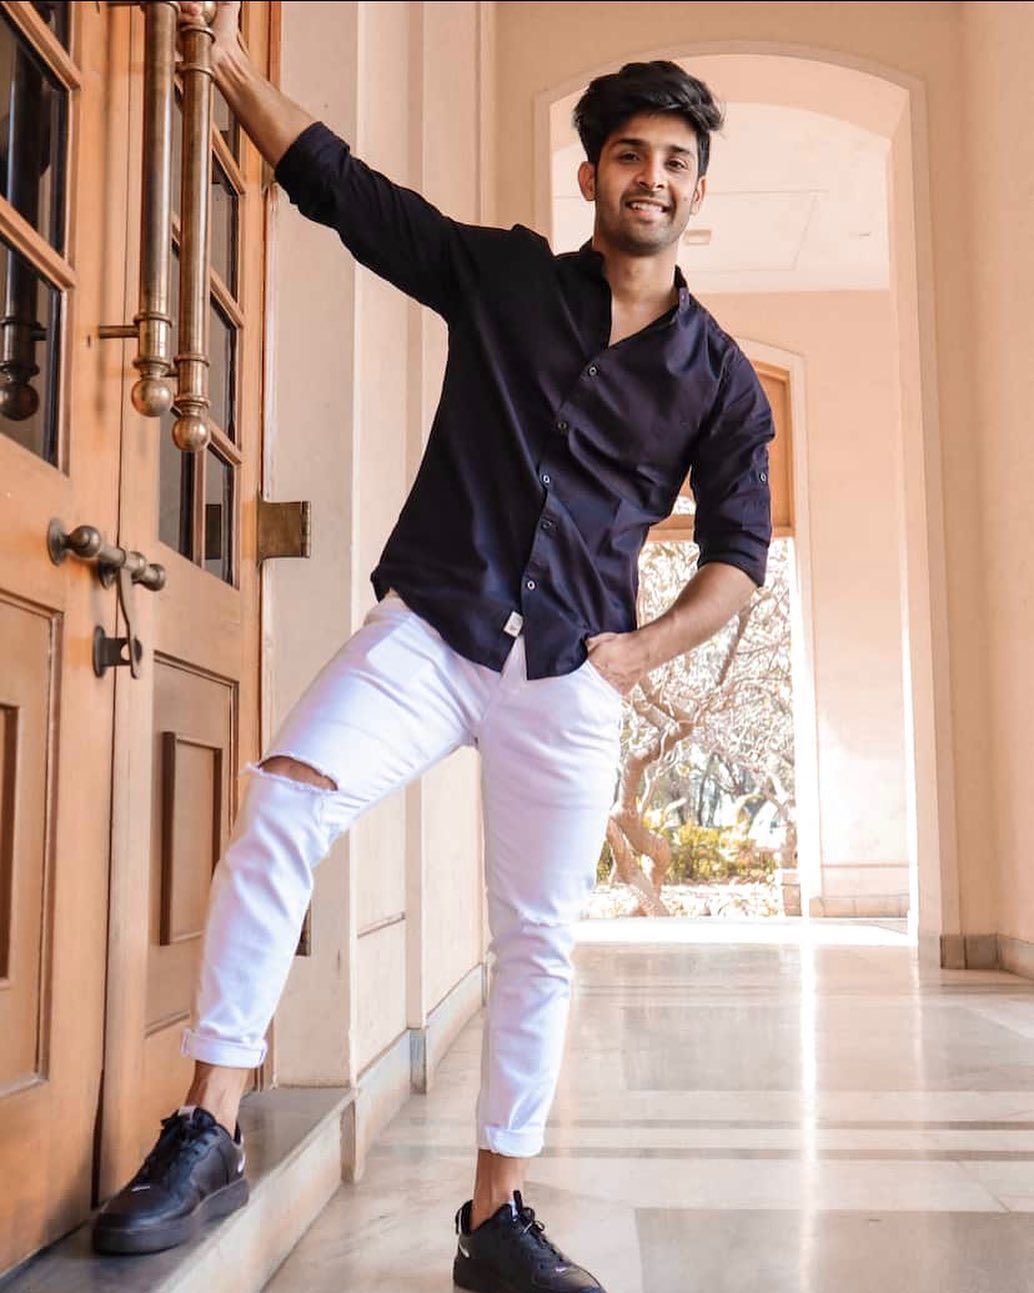 MYNTRA - Black and white to set your day right! 🖤
📸 @iamprabhatchaudhary
Look up product code: 2284691 / 4451257 / 1800842
For more on-point looks, styling hacks and fashion advice, tune in to the bin...